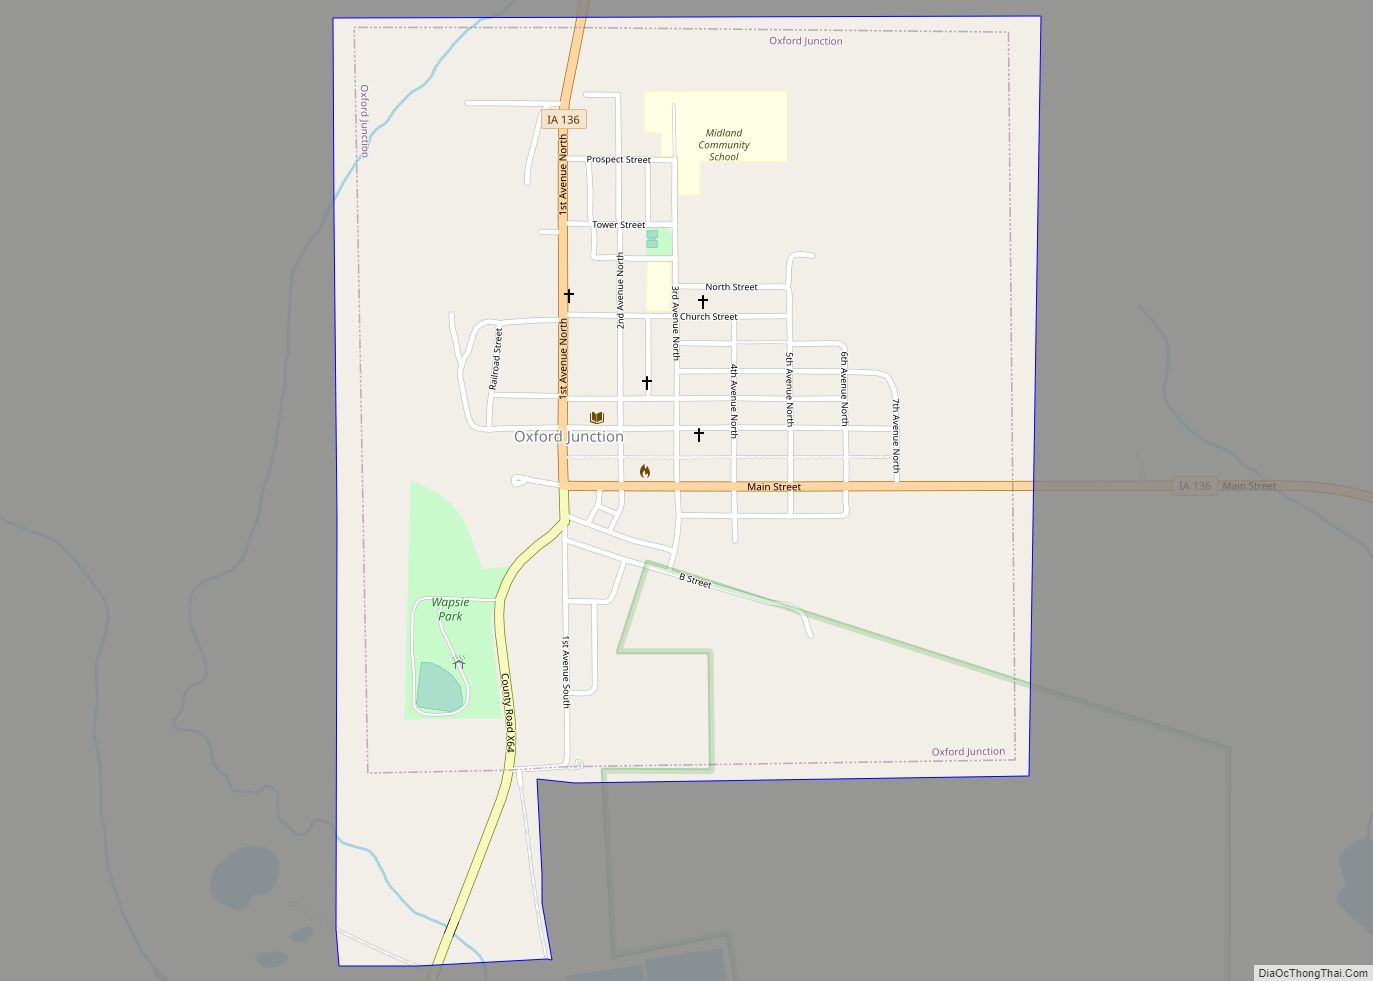 Map of Oxford Junction city